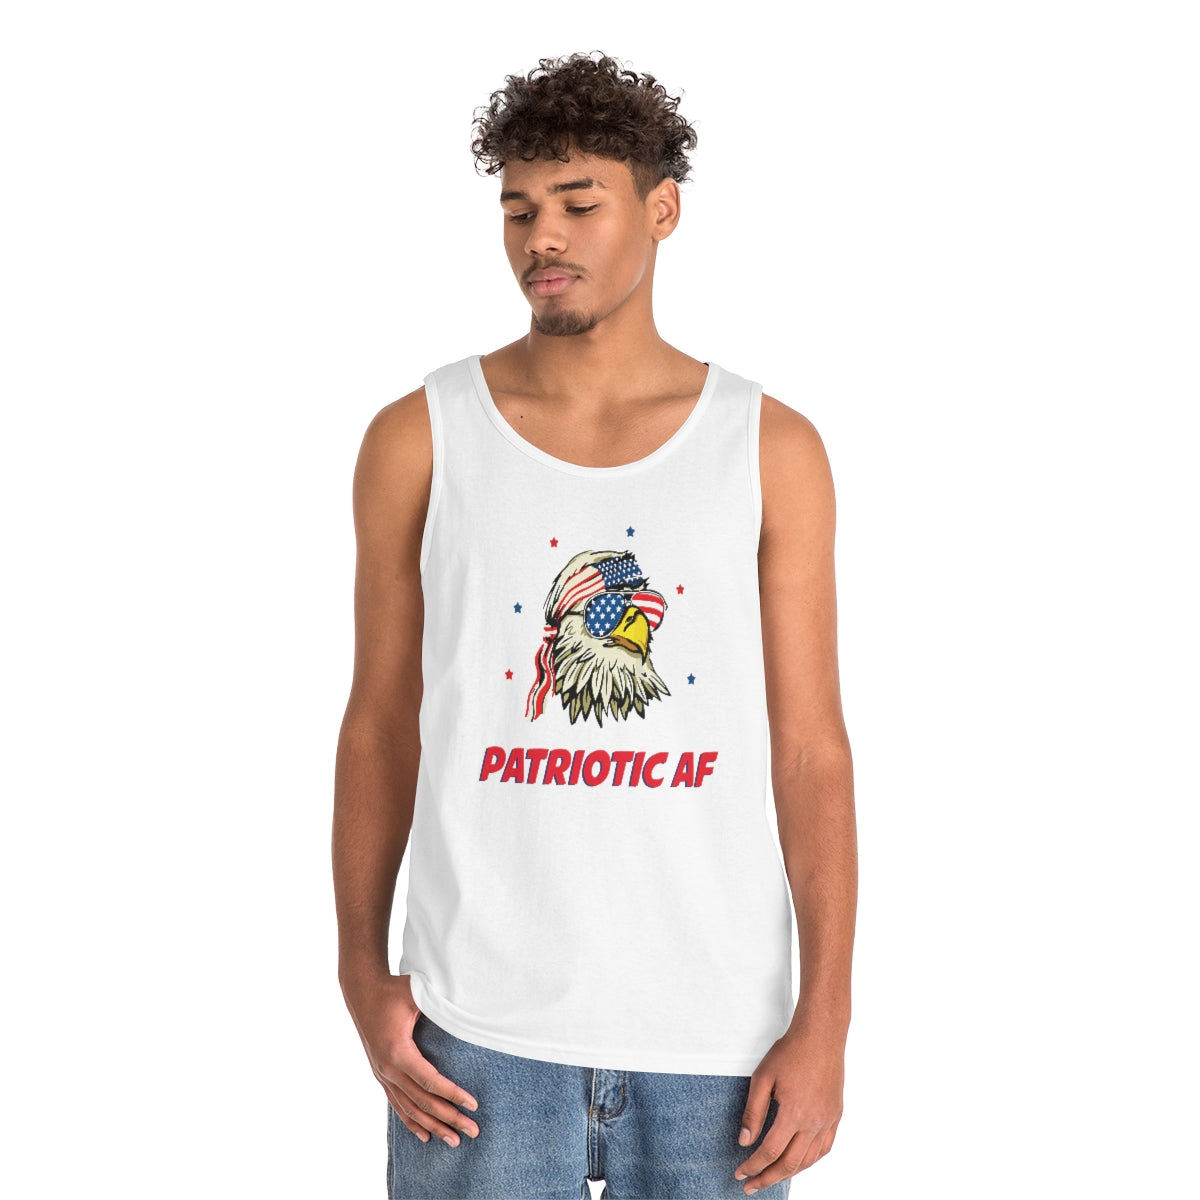 Patriotic AF with American Eagle | Men's Heavy Cotton Tank Top - Rise of The New Media